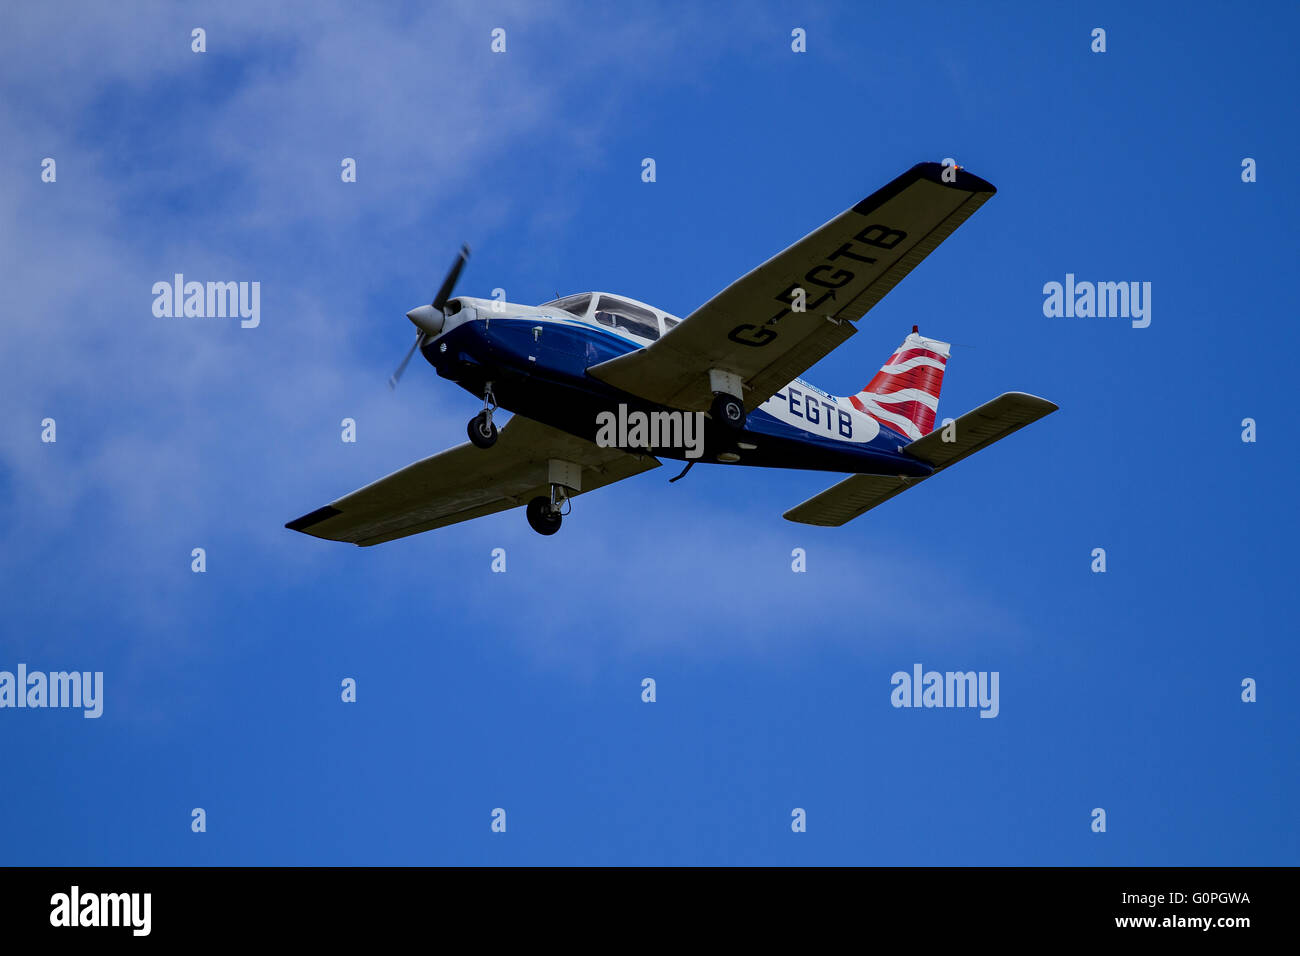 Dundee, Tayside, Scotland, UK, May 3rd 2016. UK Weather: High winds in Dundee. Tayside Aviation pilots landing their aircraft without difficulty in blustery winds gusting up to 30mph at the Dundee Airport. Credit: Dundee Photographics / Alamy Live News Stock Photo